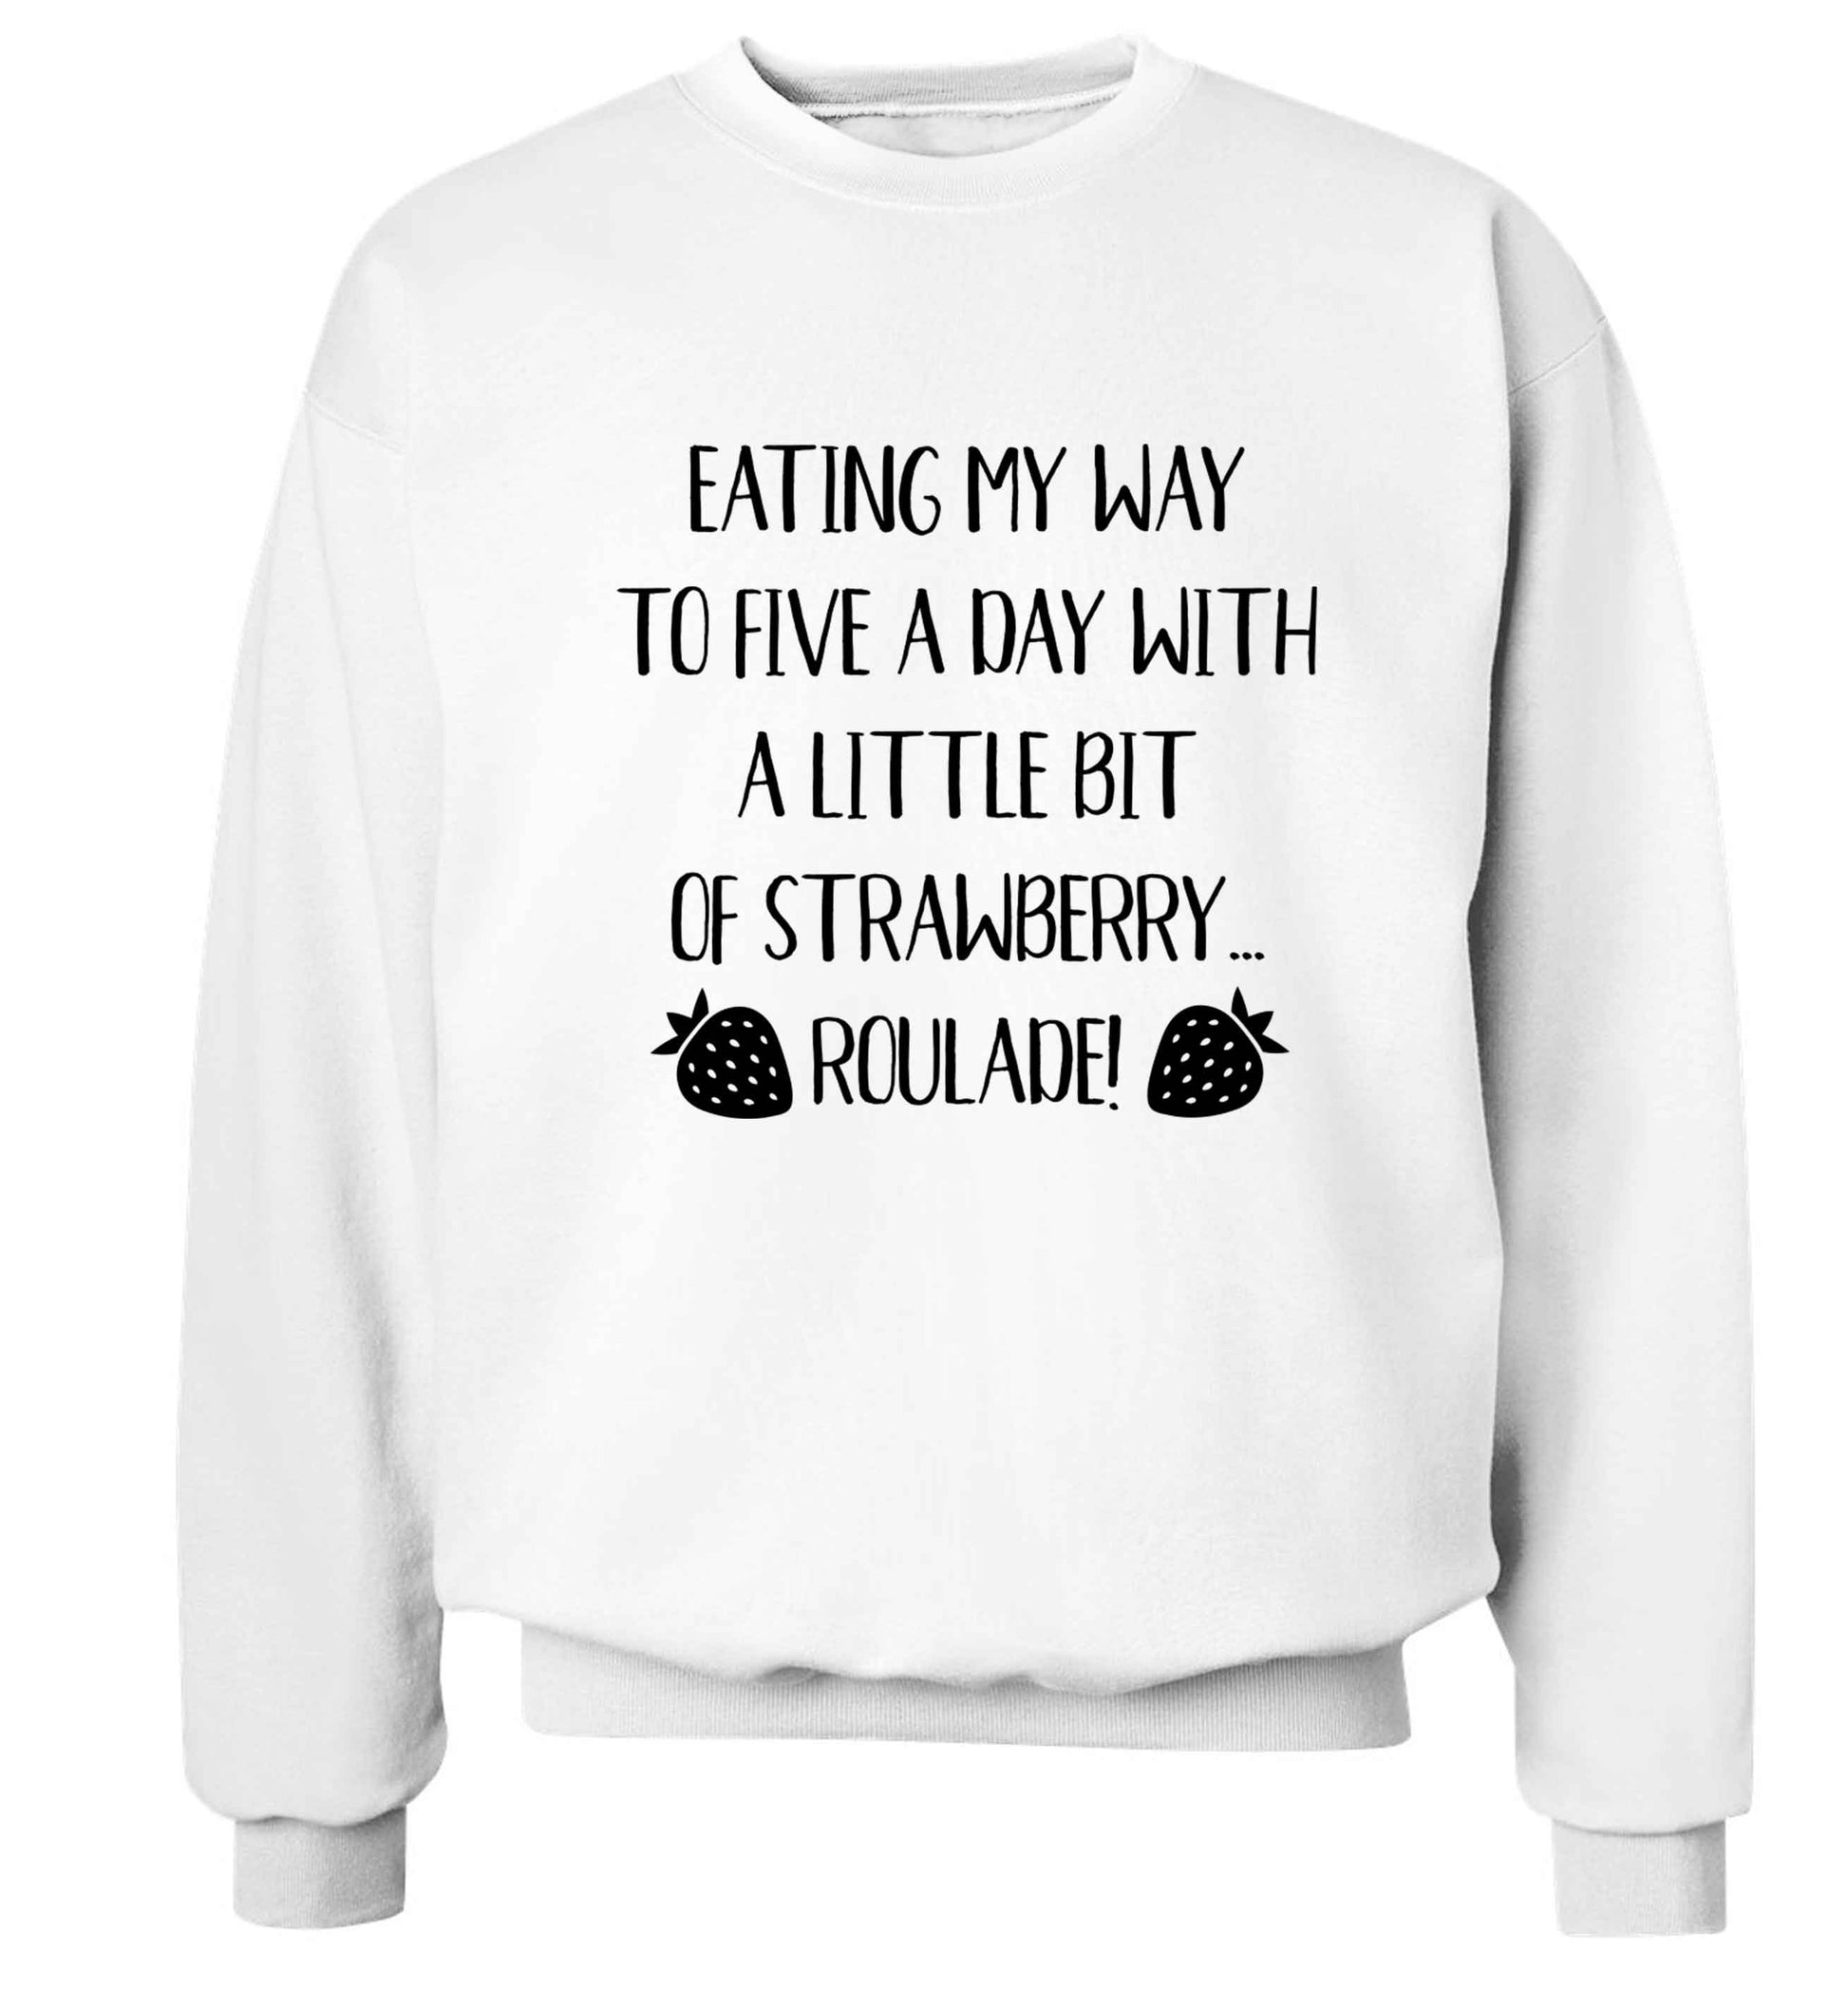 Eating my way to five a day with a little bit of strawberry roulade Adult's unisex white Sweater 2XL